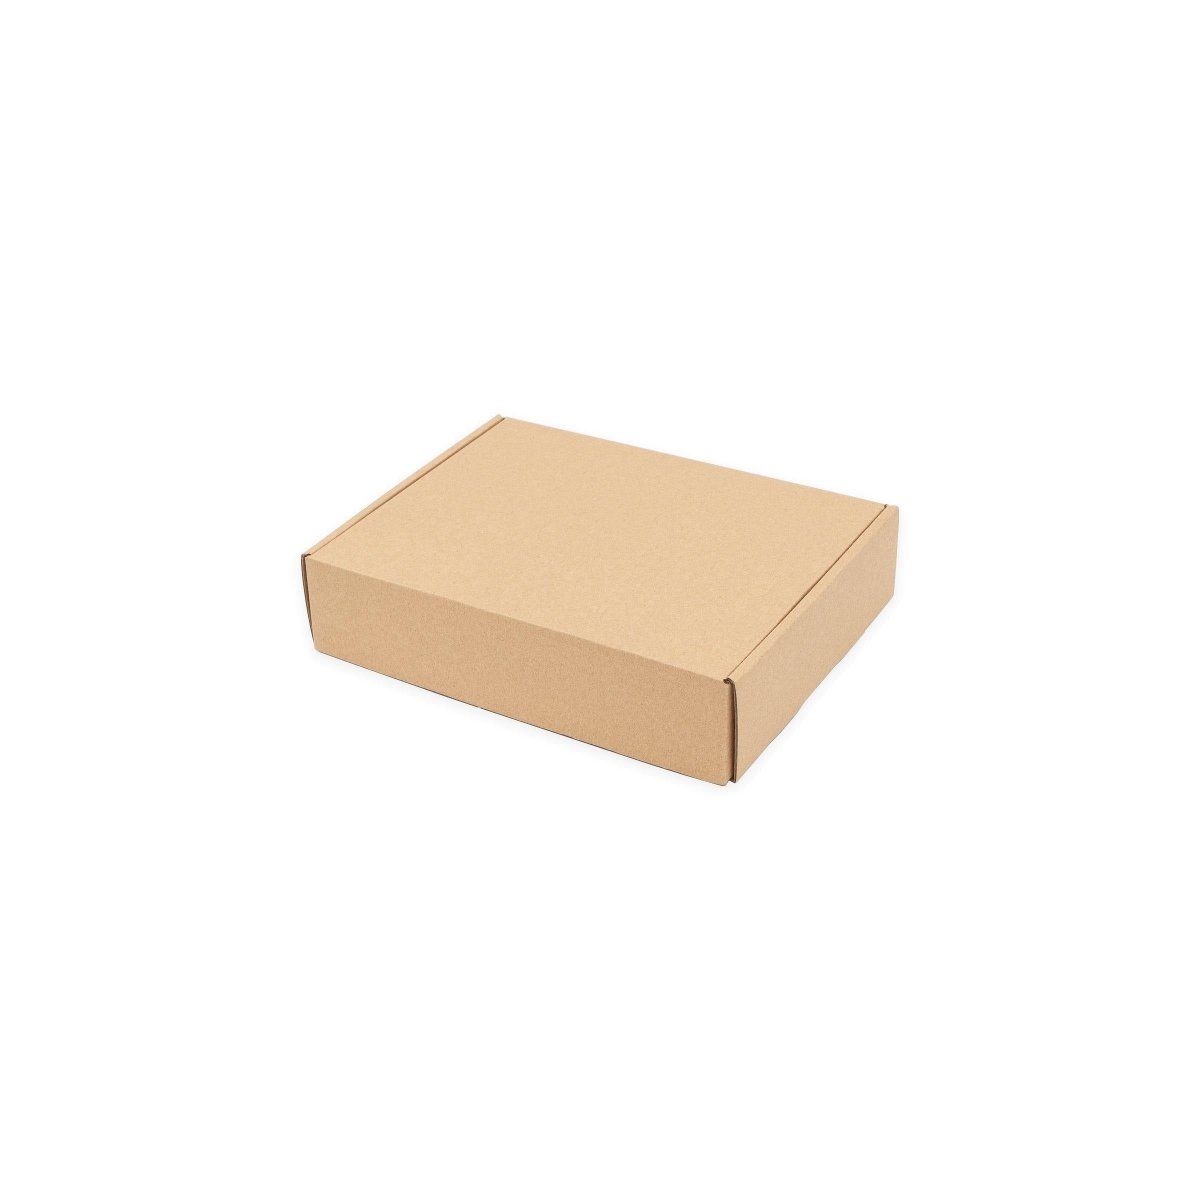 Mailing Box 250 x 180 x 55mm B123 Tuck Front Mailer BoxMore